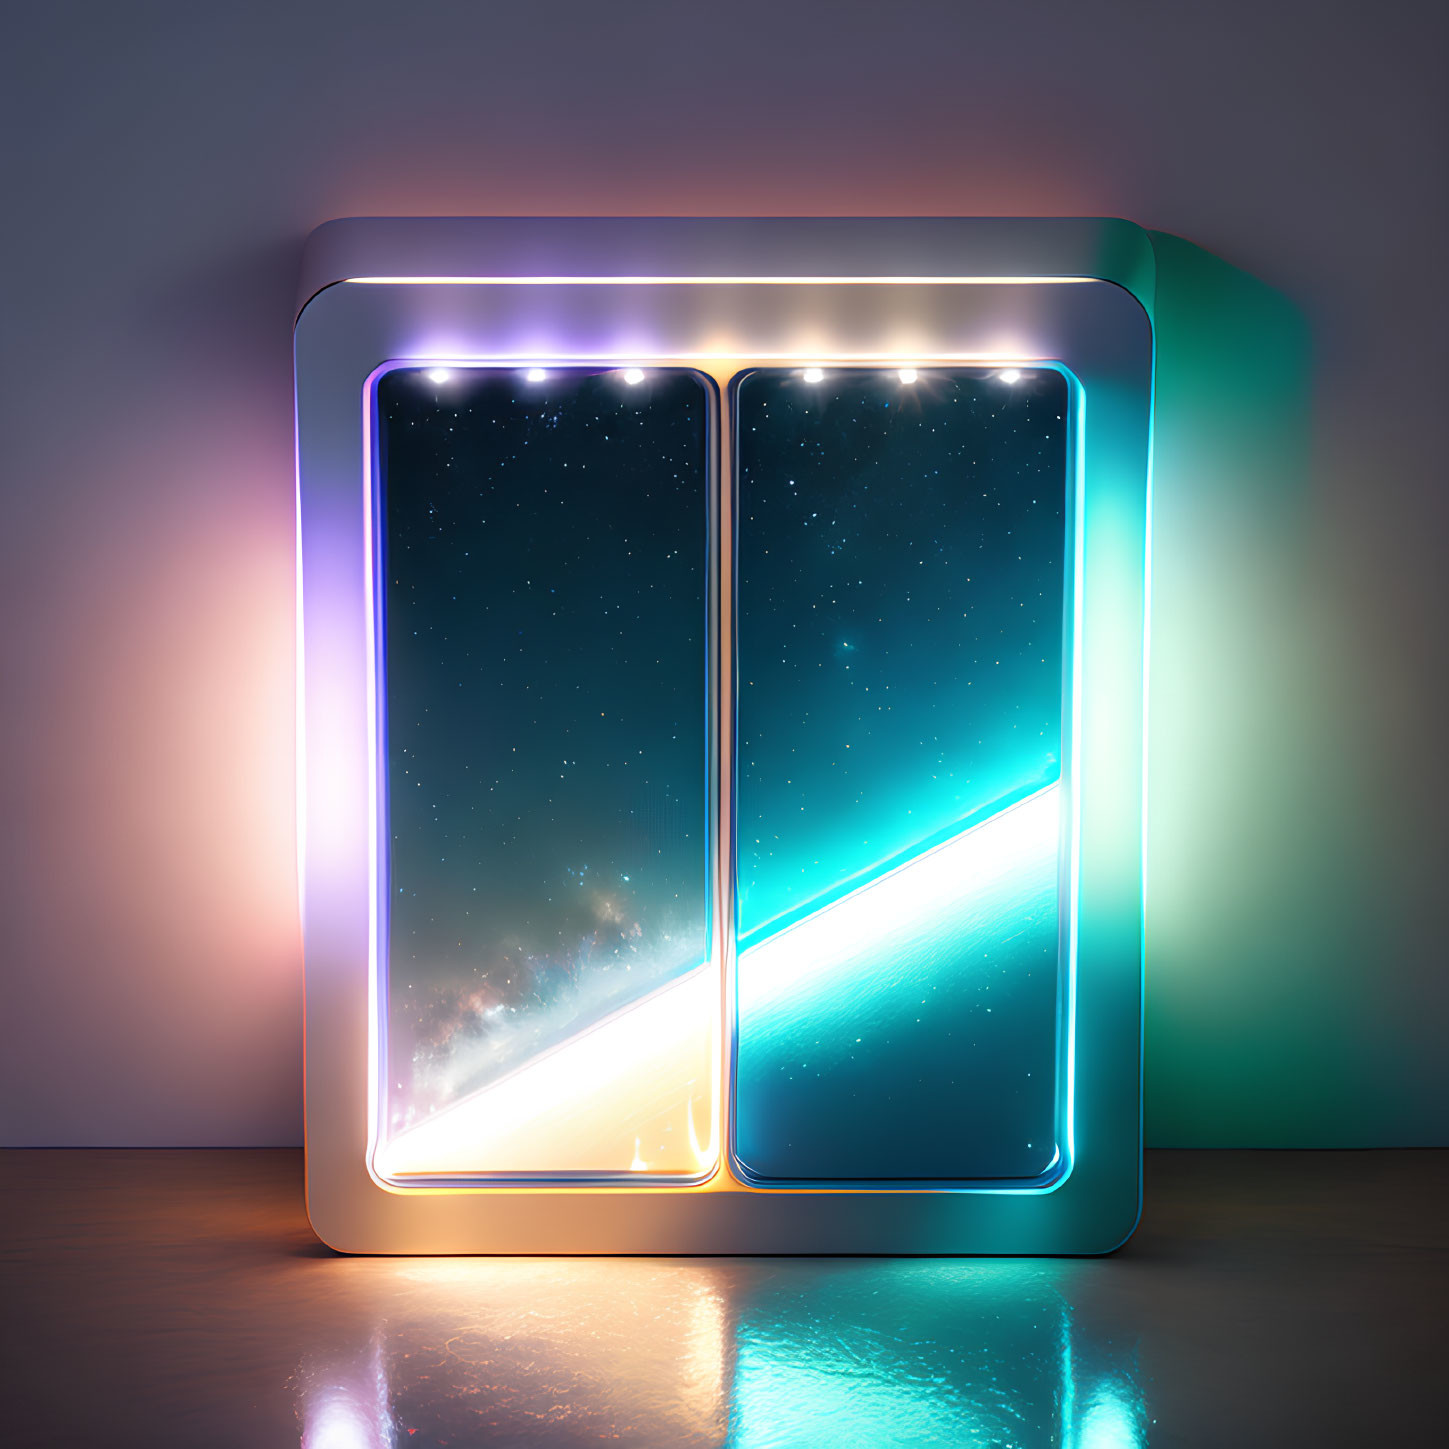 Neon-lit frame featuring smartphones with cosmic wallpapers